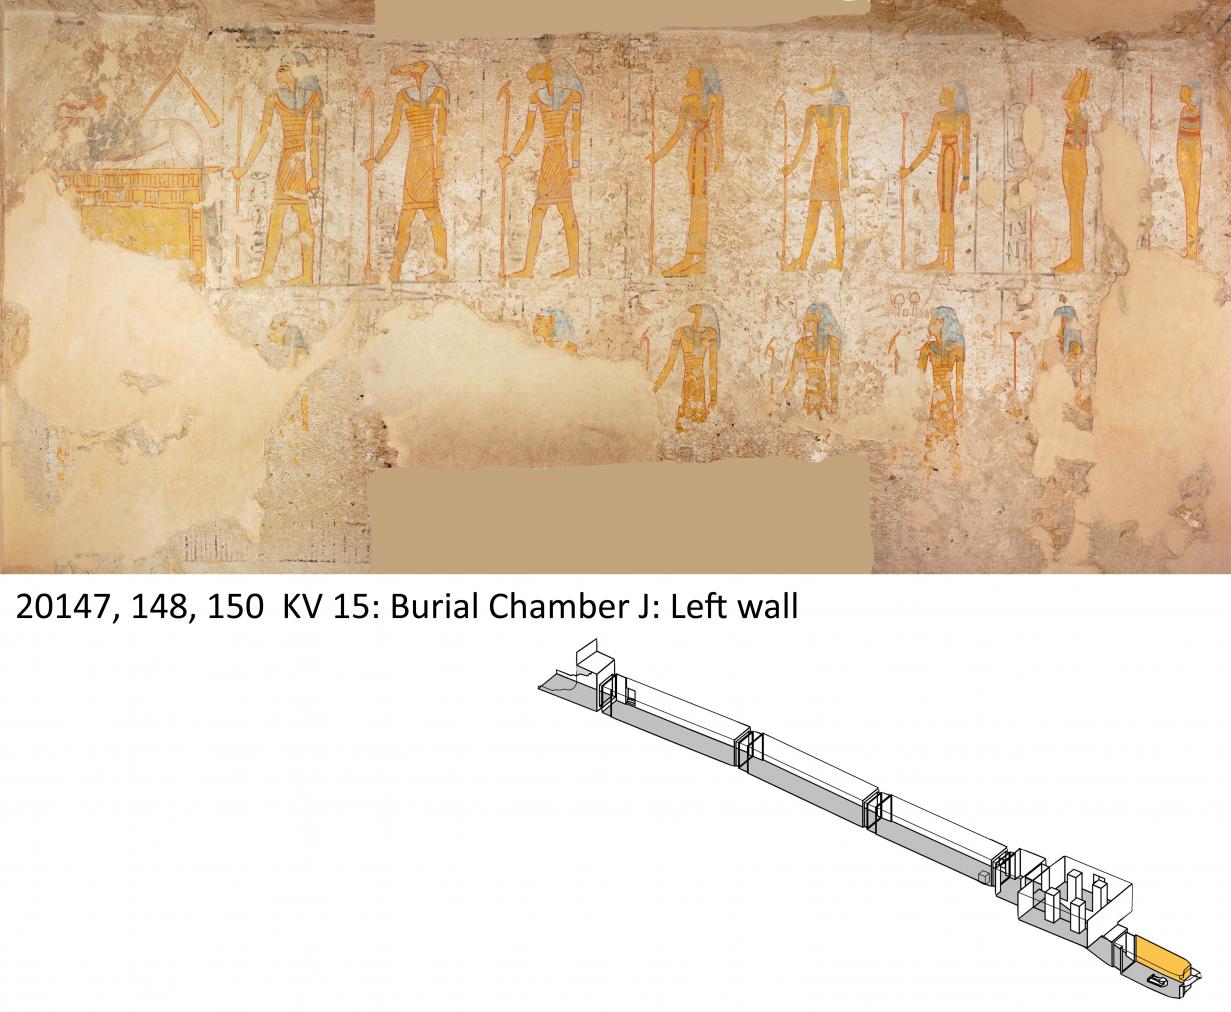 Left wall, burial chamber.